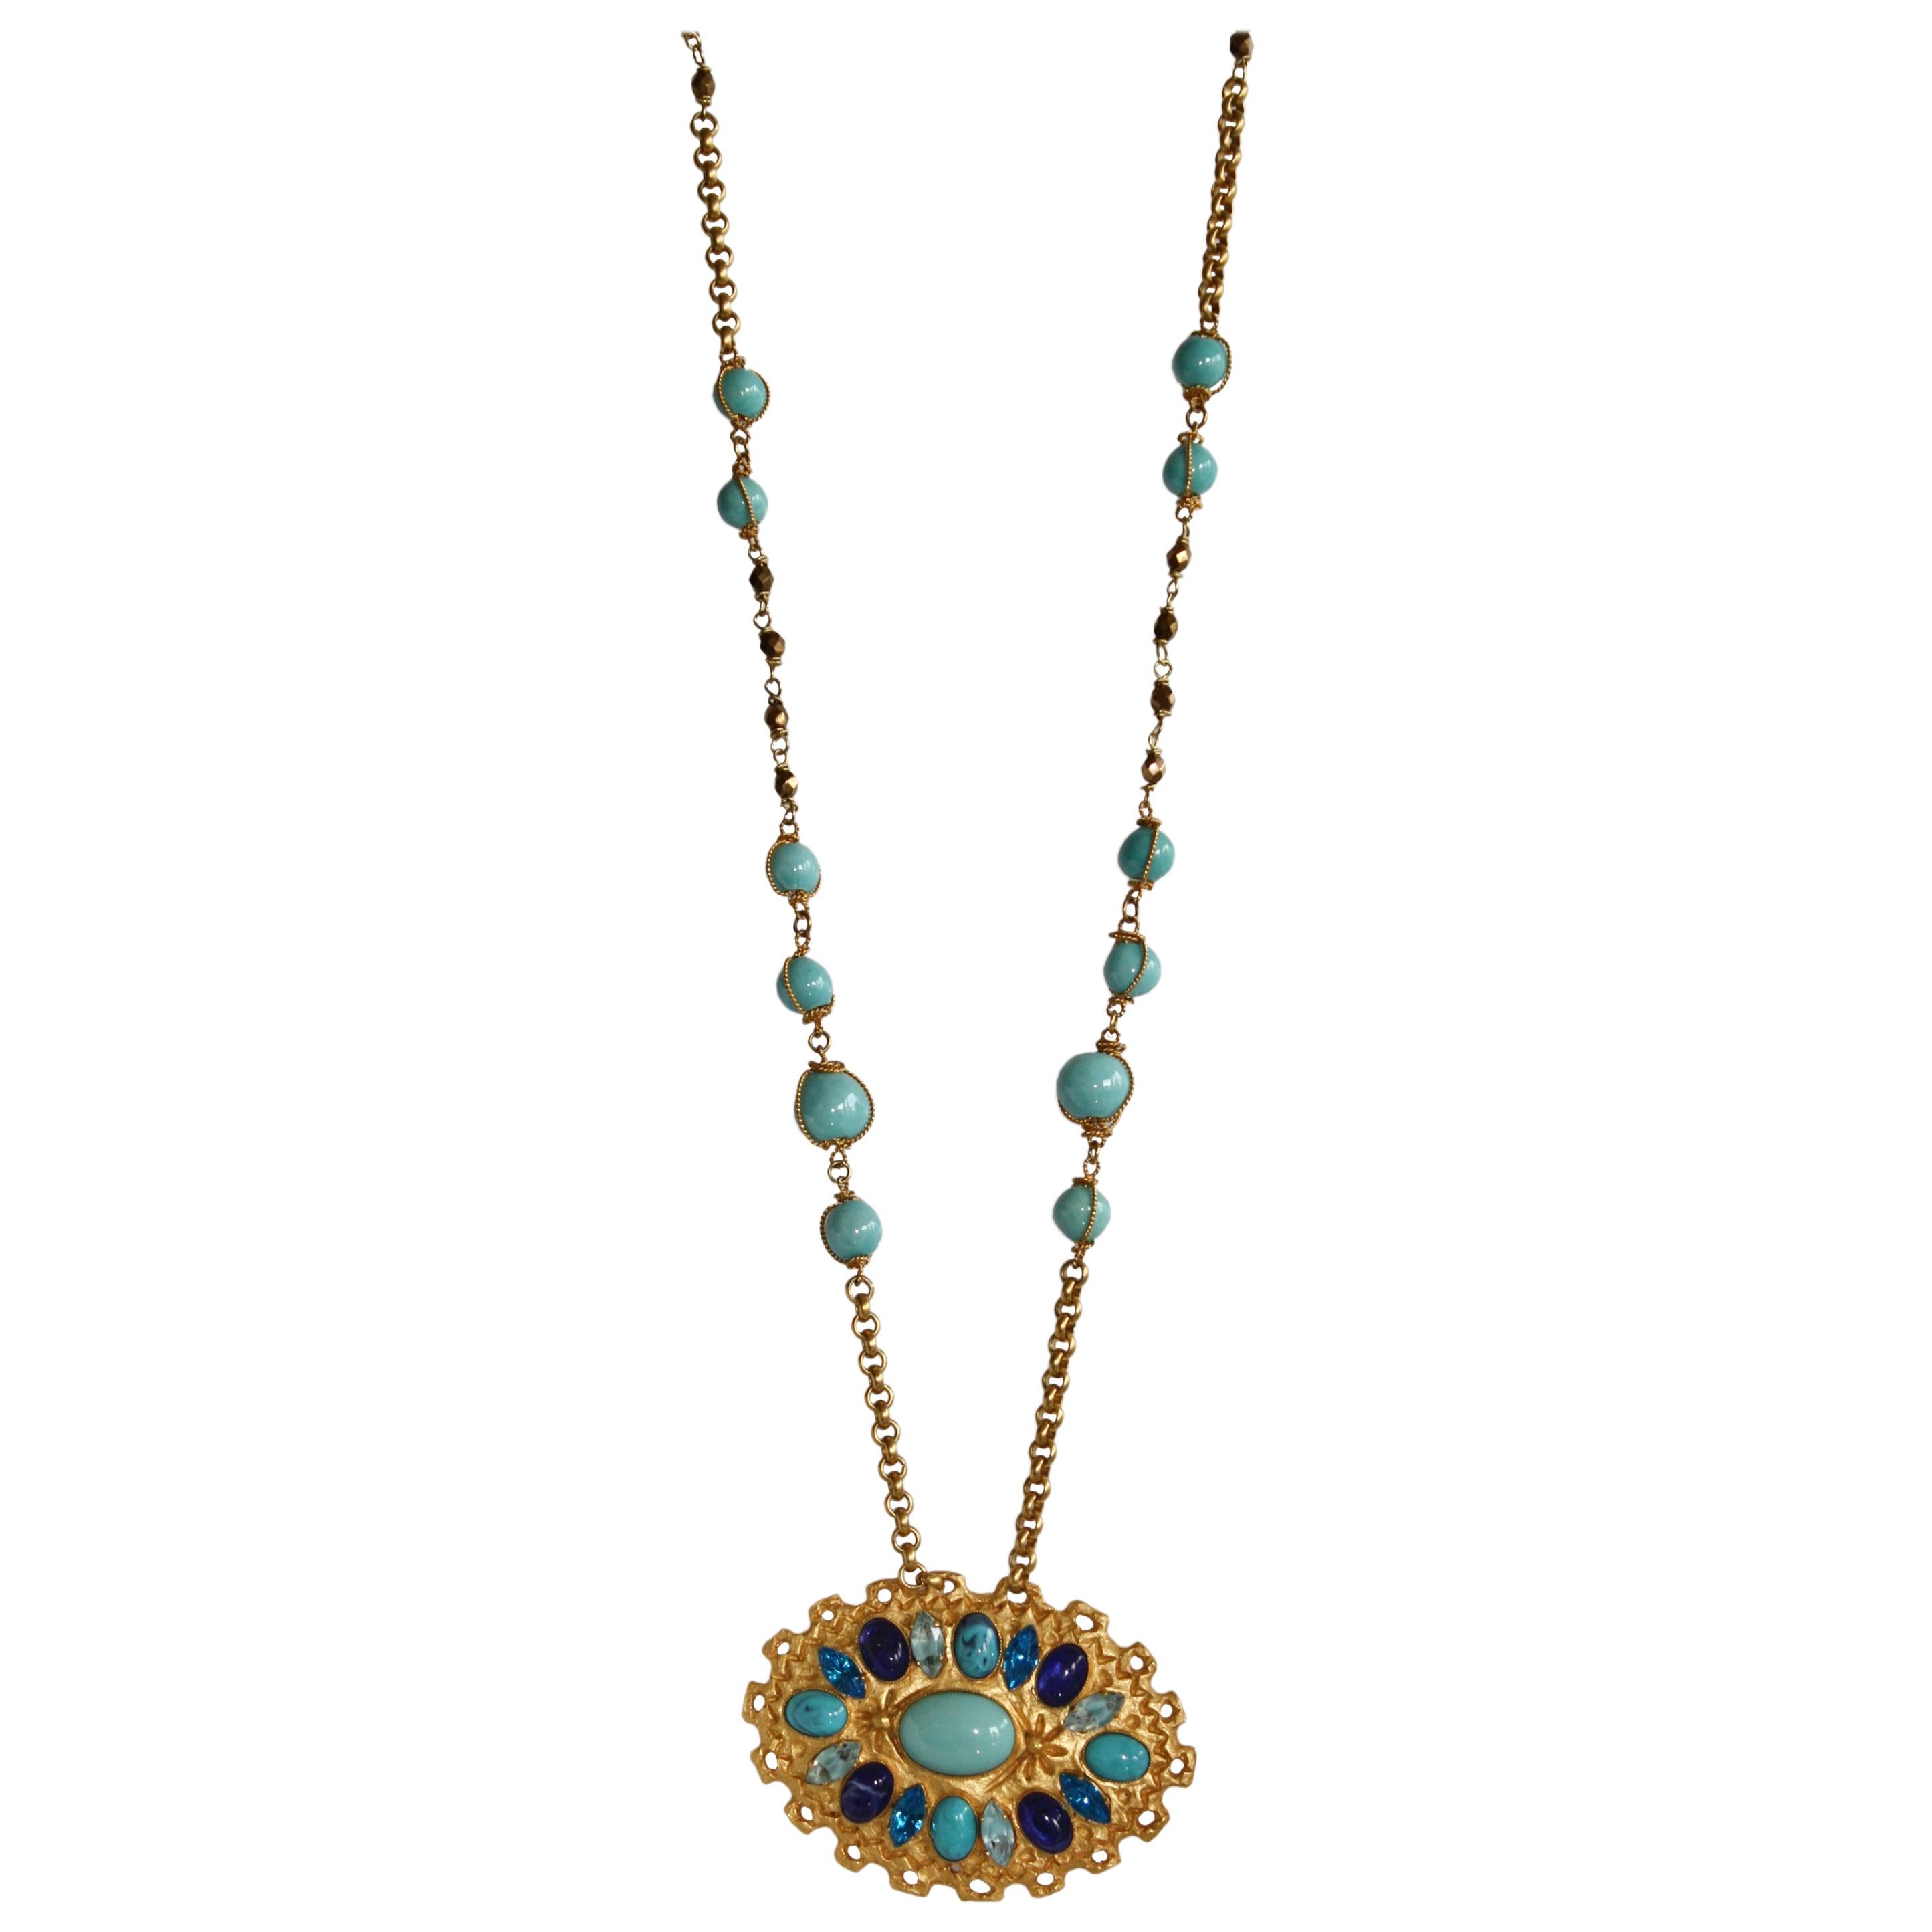 Carole St. Germes Turquoise Glass and Crystal Long Pendant Necklace